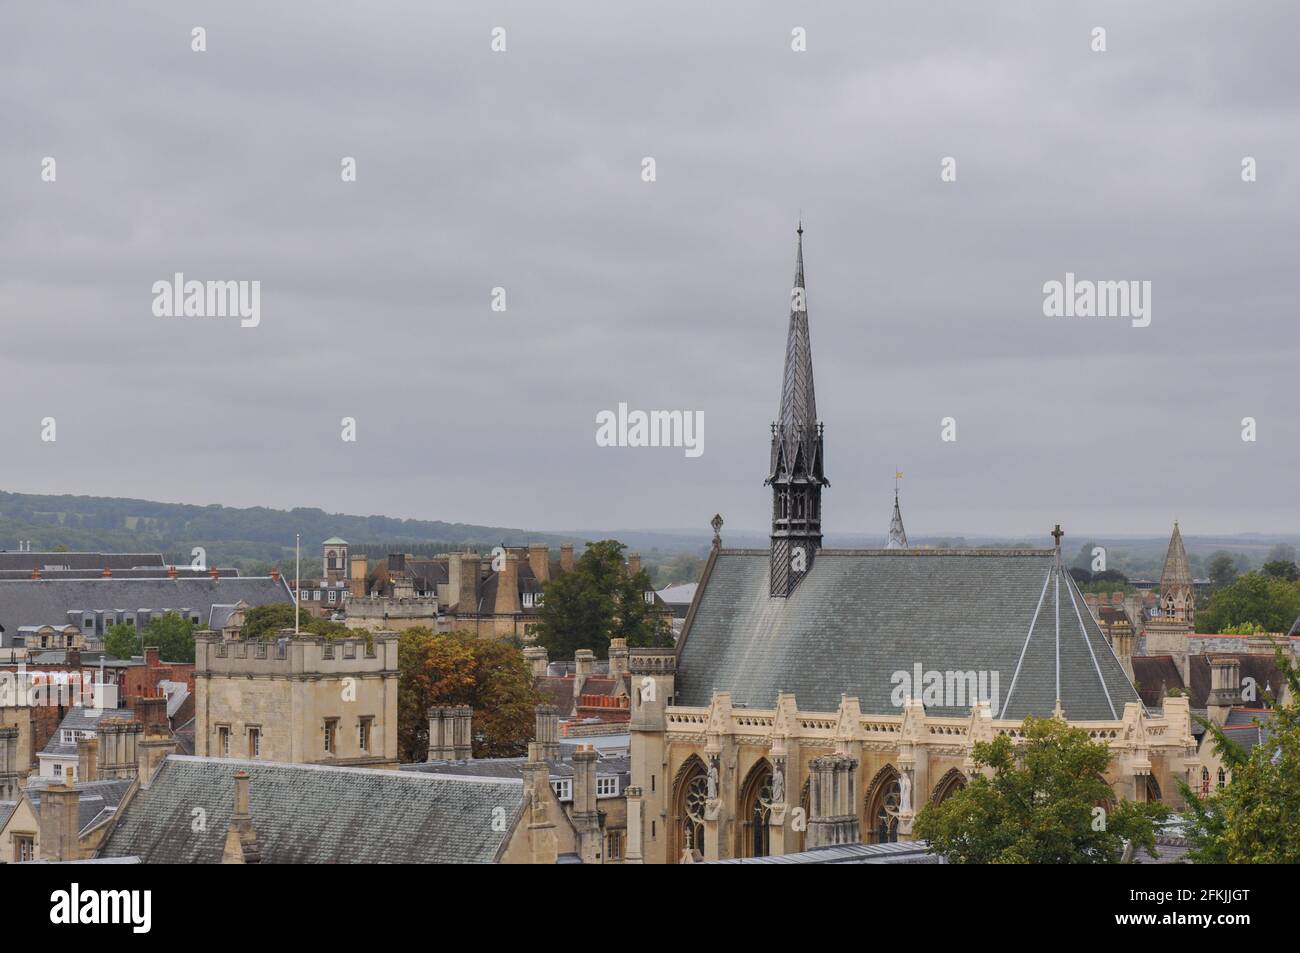 Rooftop view on historical university buildings towards Exeter college chapel, Oxford, United Kingdom. Overcast sky. Stock Photo